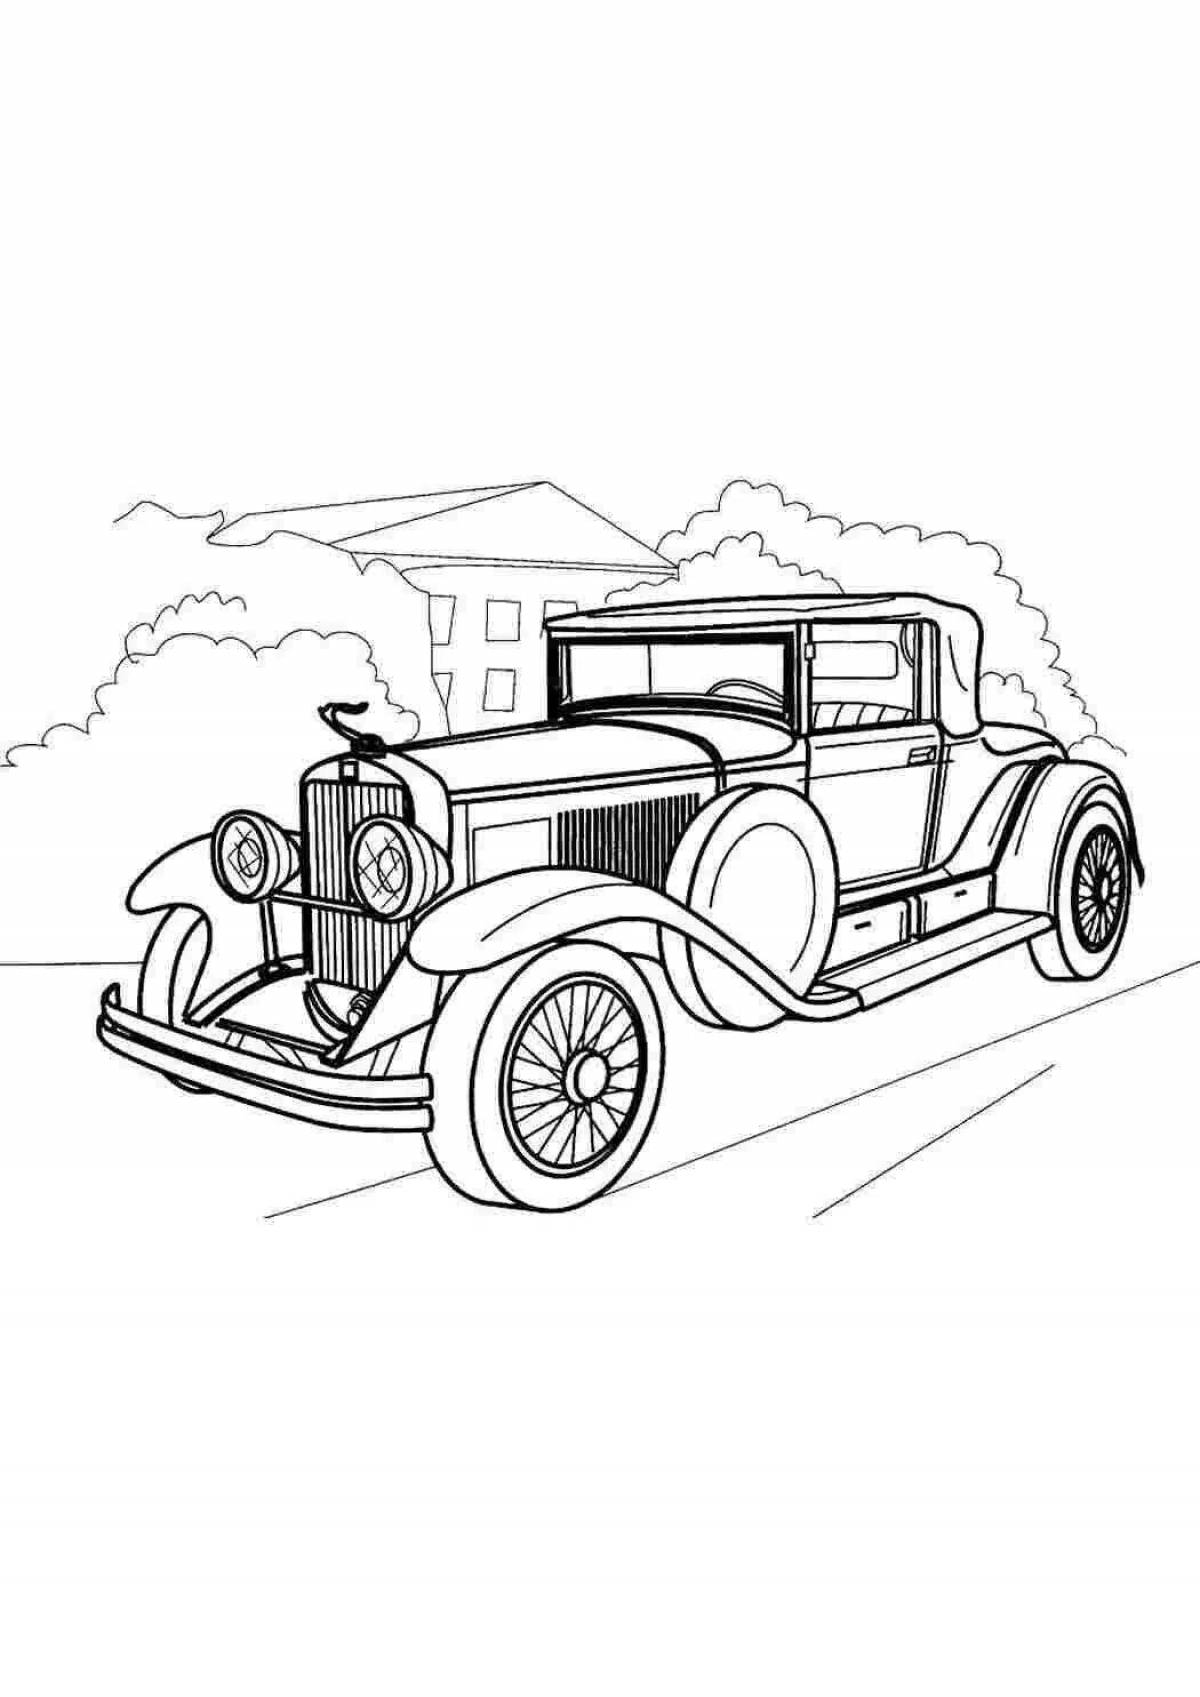 Coloring book bright vintage cars